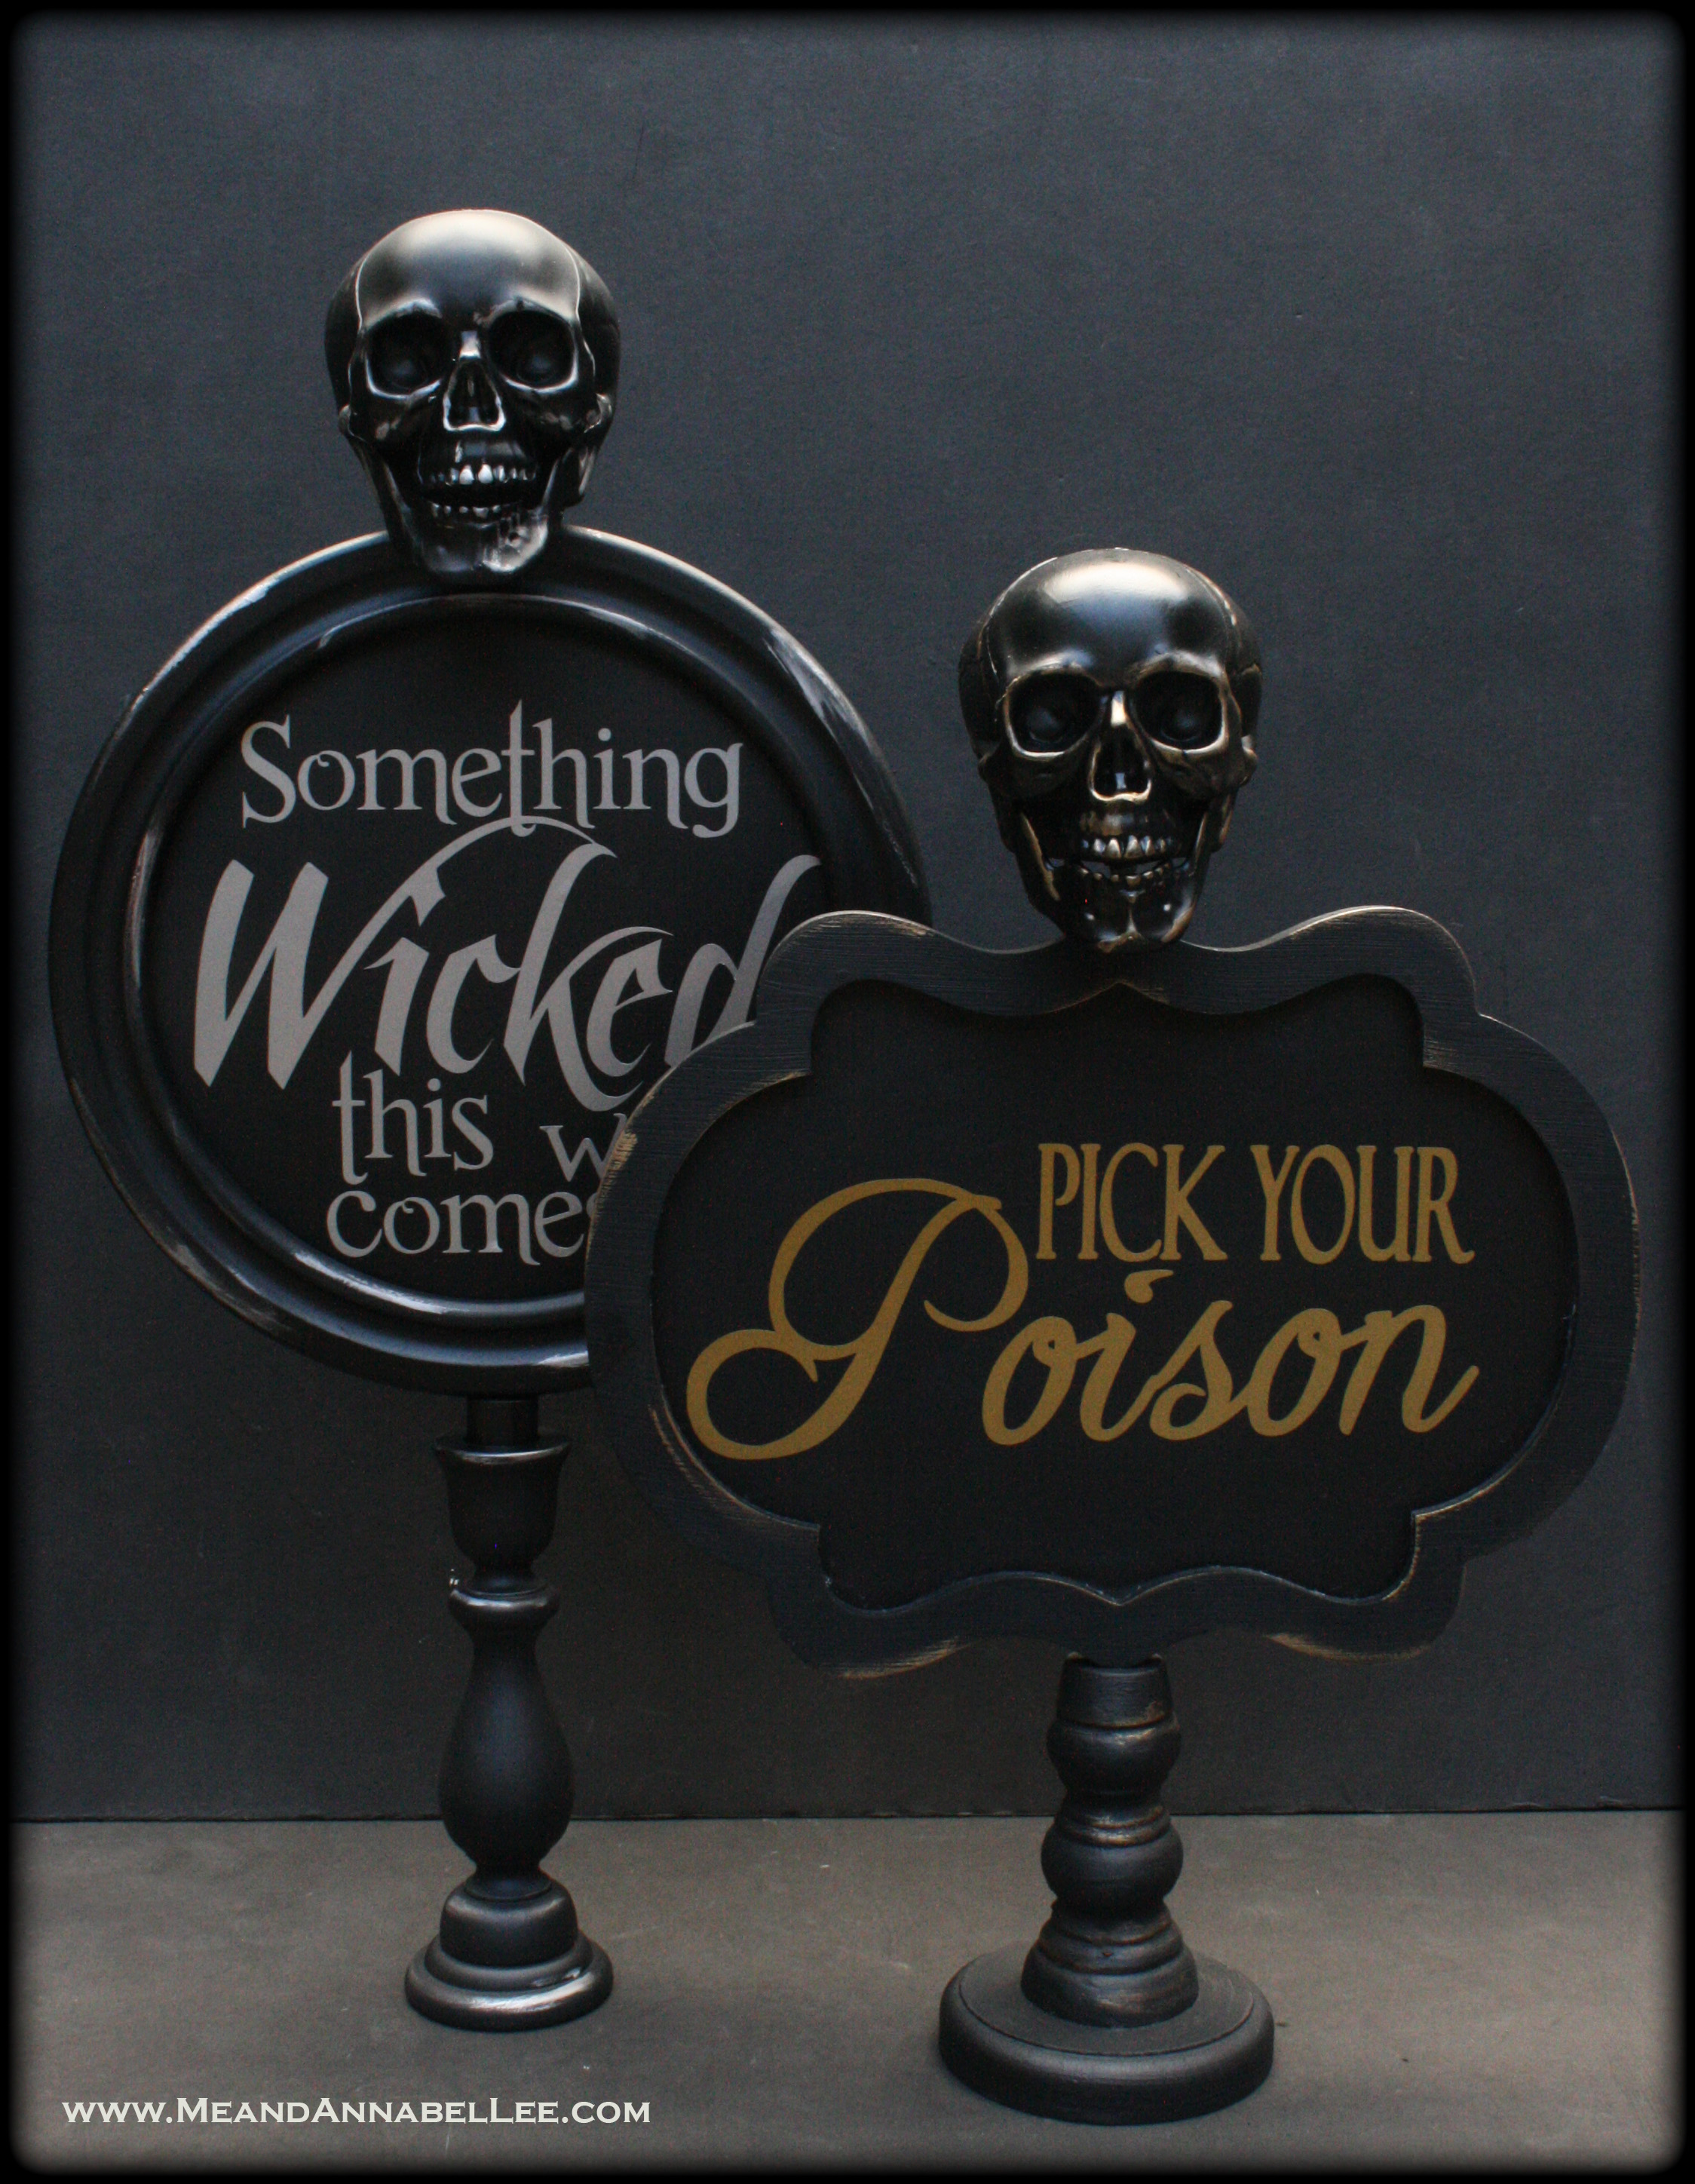 DIY Skull Chalkboard Sign | Halloween Crafts | Gothic Stand | Something Wicked This Way Comes | Pick Your Poison | Cricut Vinyl Lettering |www.MeandAnnabelLee.com